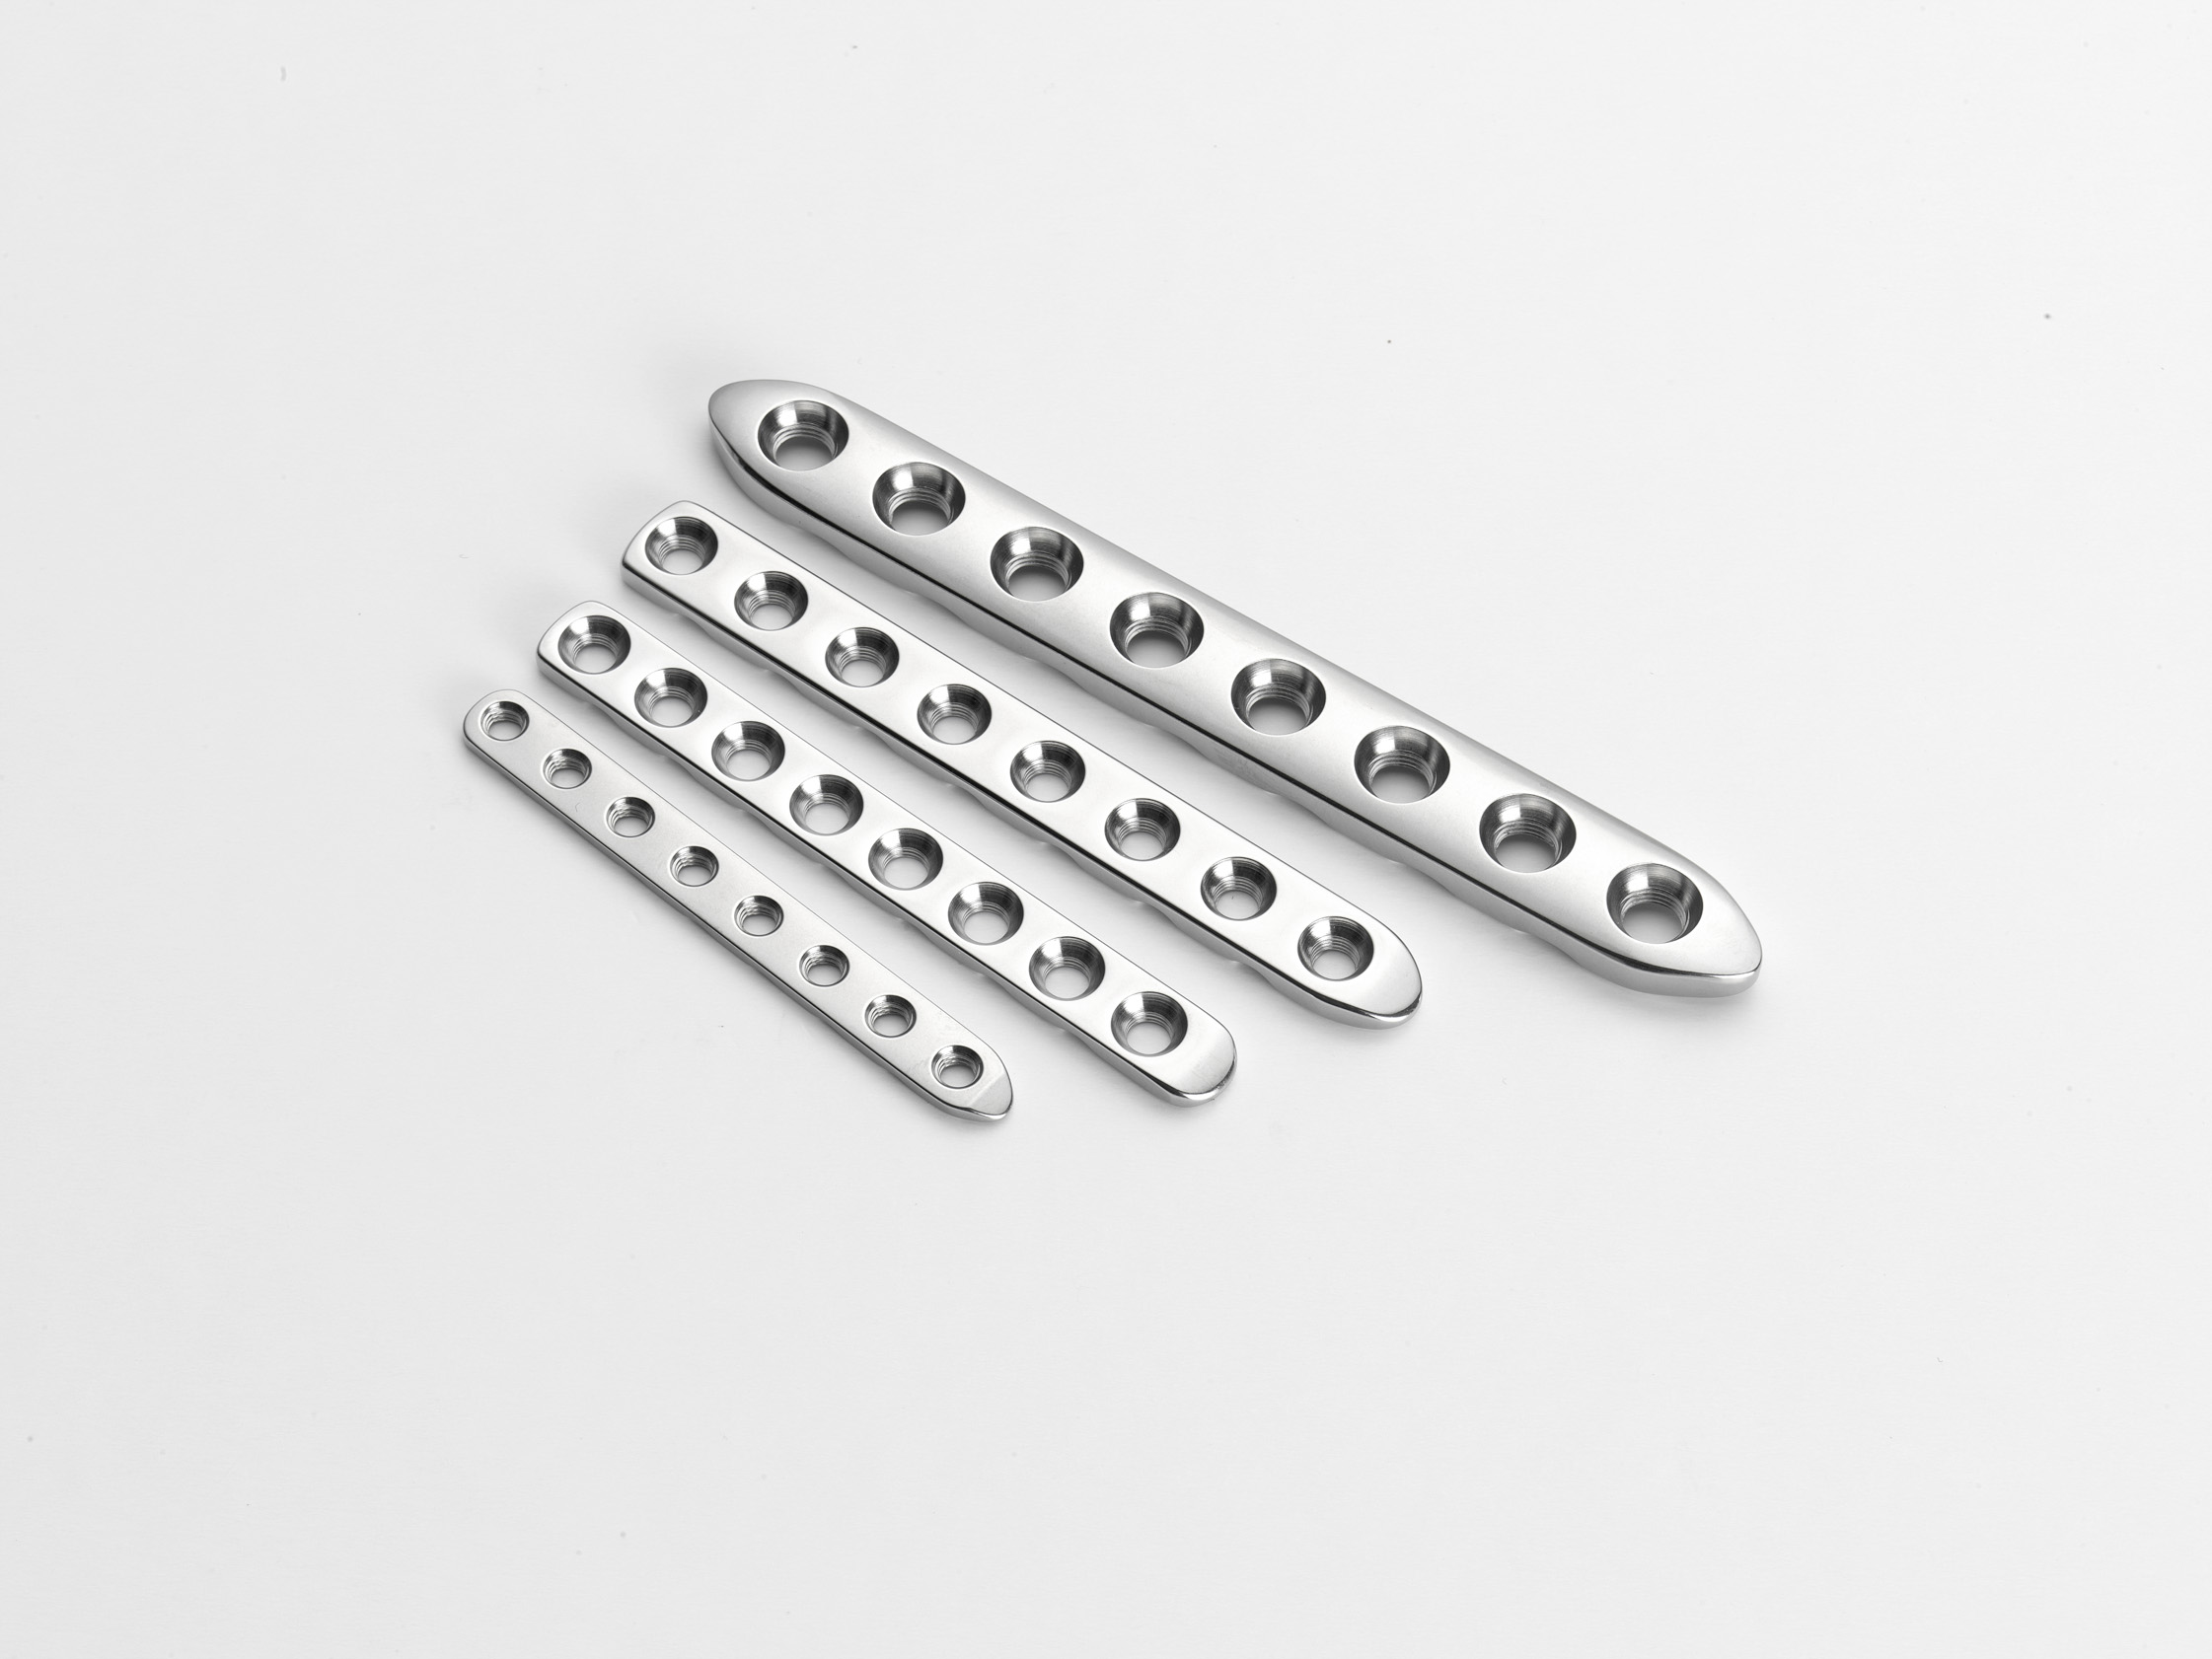 ViLock 3.5mm Plates with Stacked Locking Holes